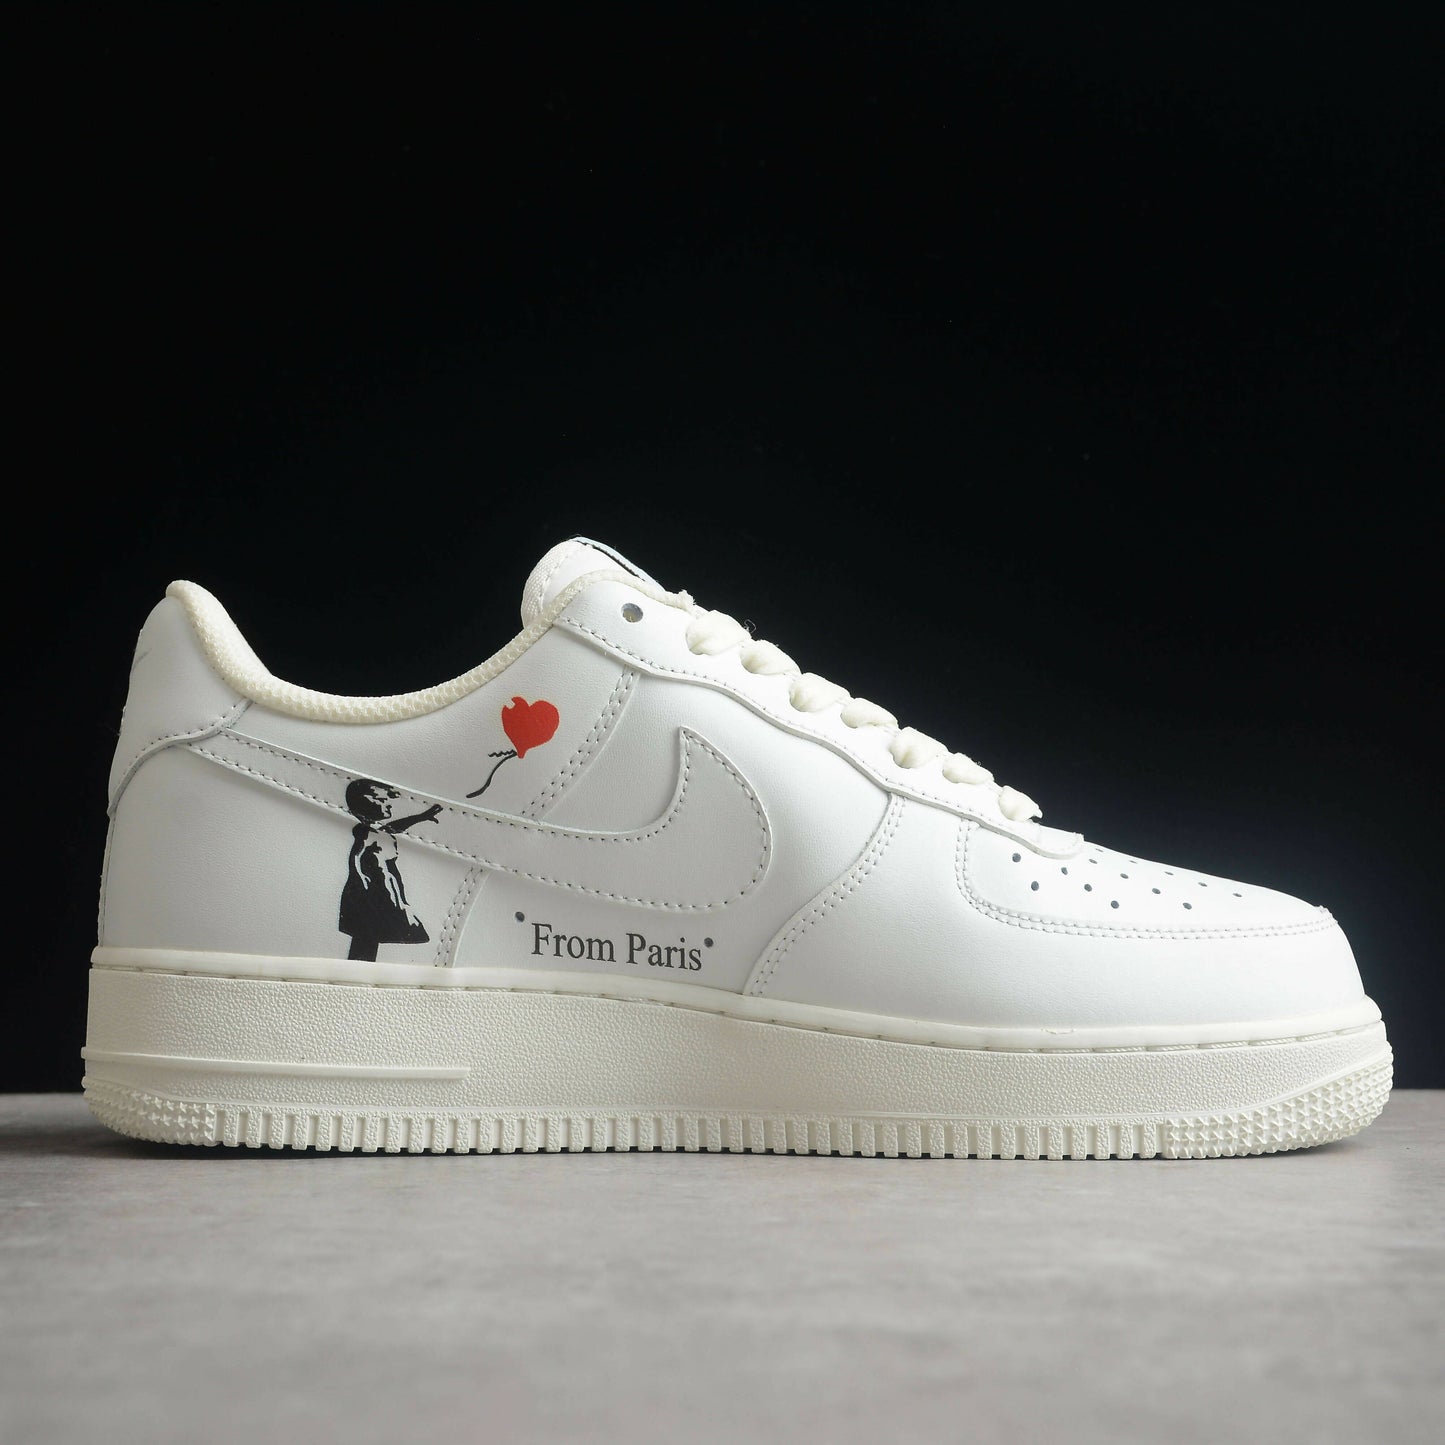 "Balloon Girl" by Banksy x Air Force 1